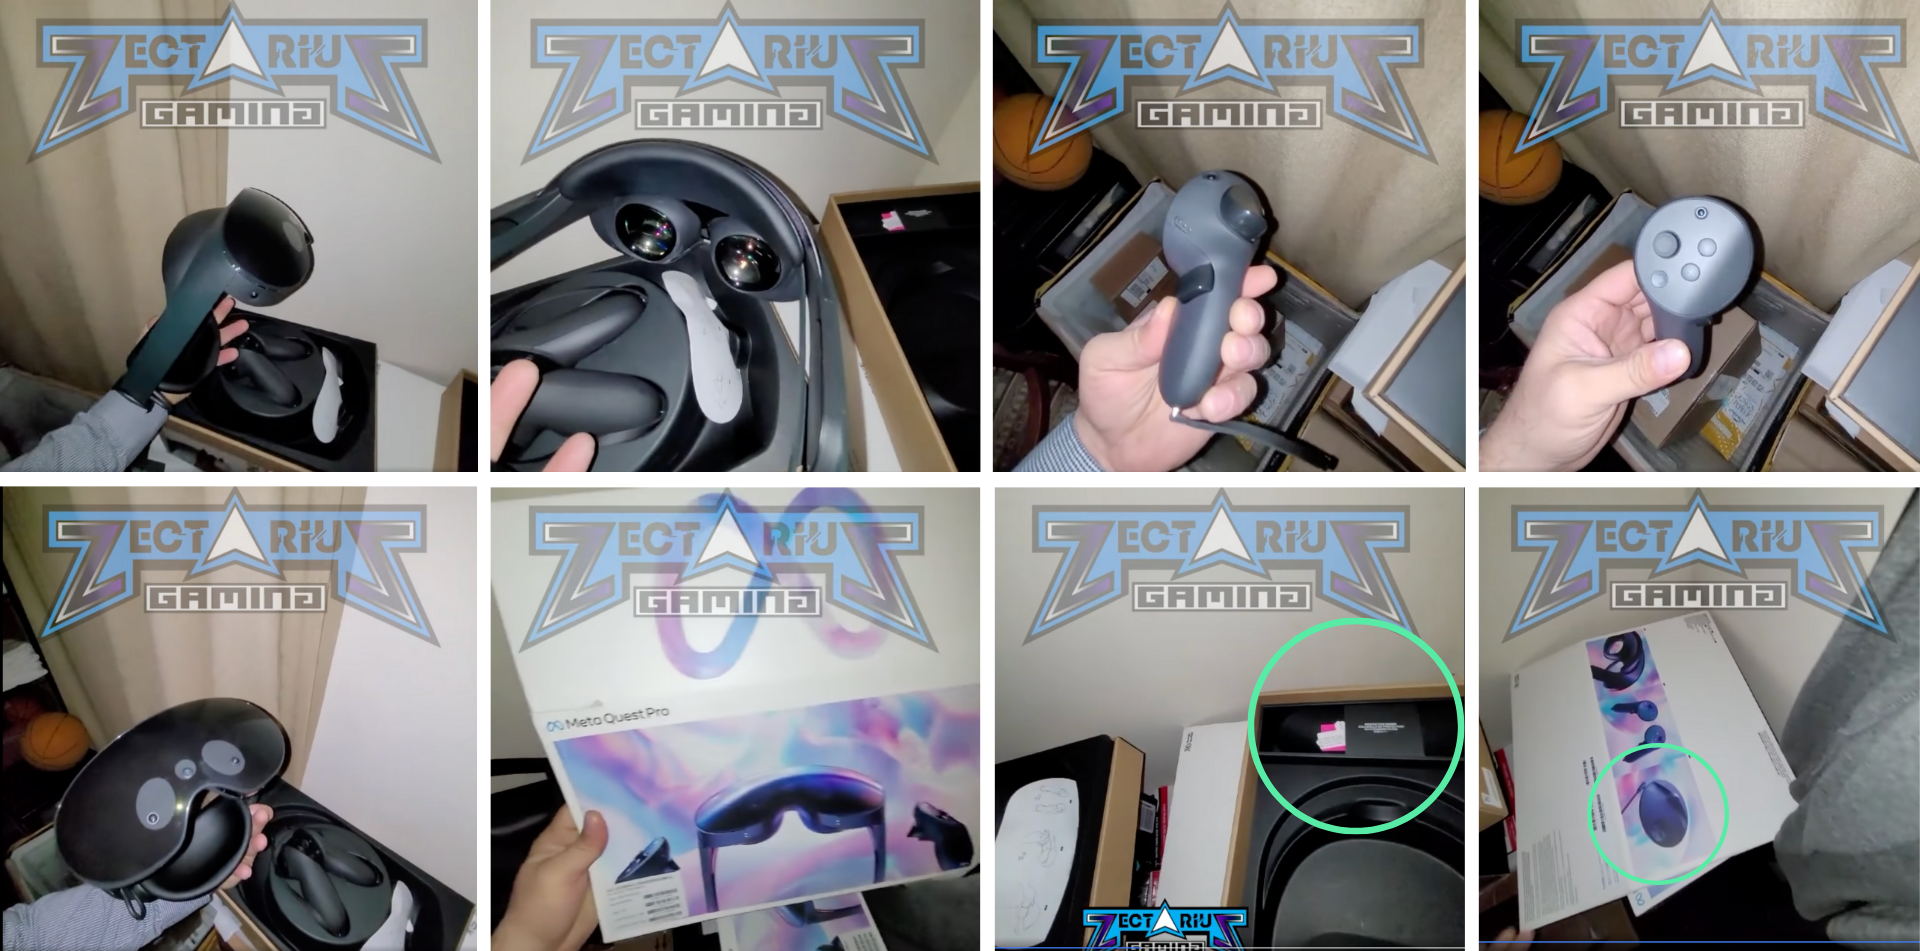 A leaked video of the Meta Quest Pro hints at what’s next for VR headsets